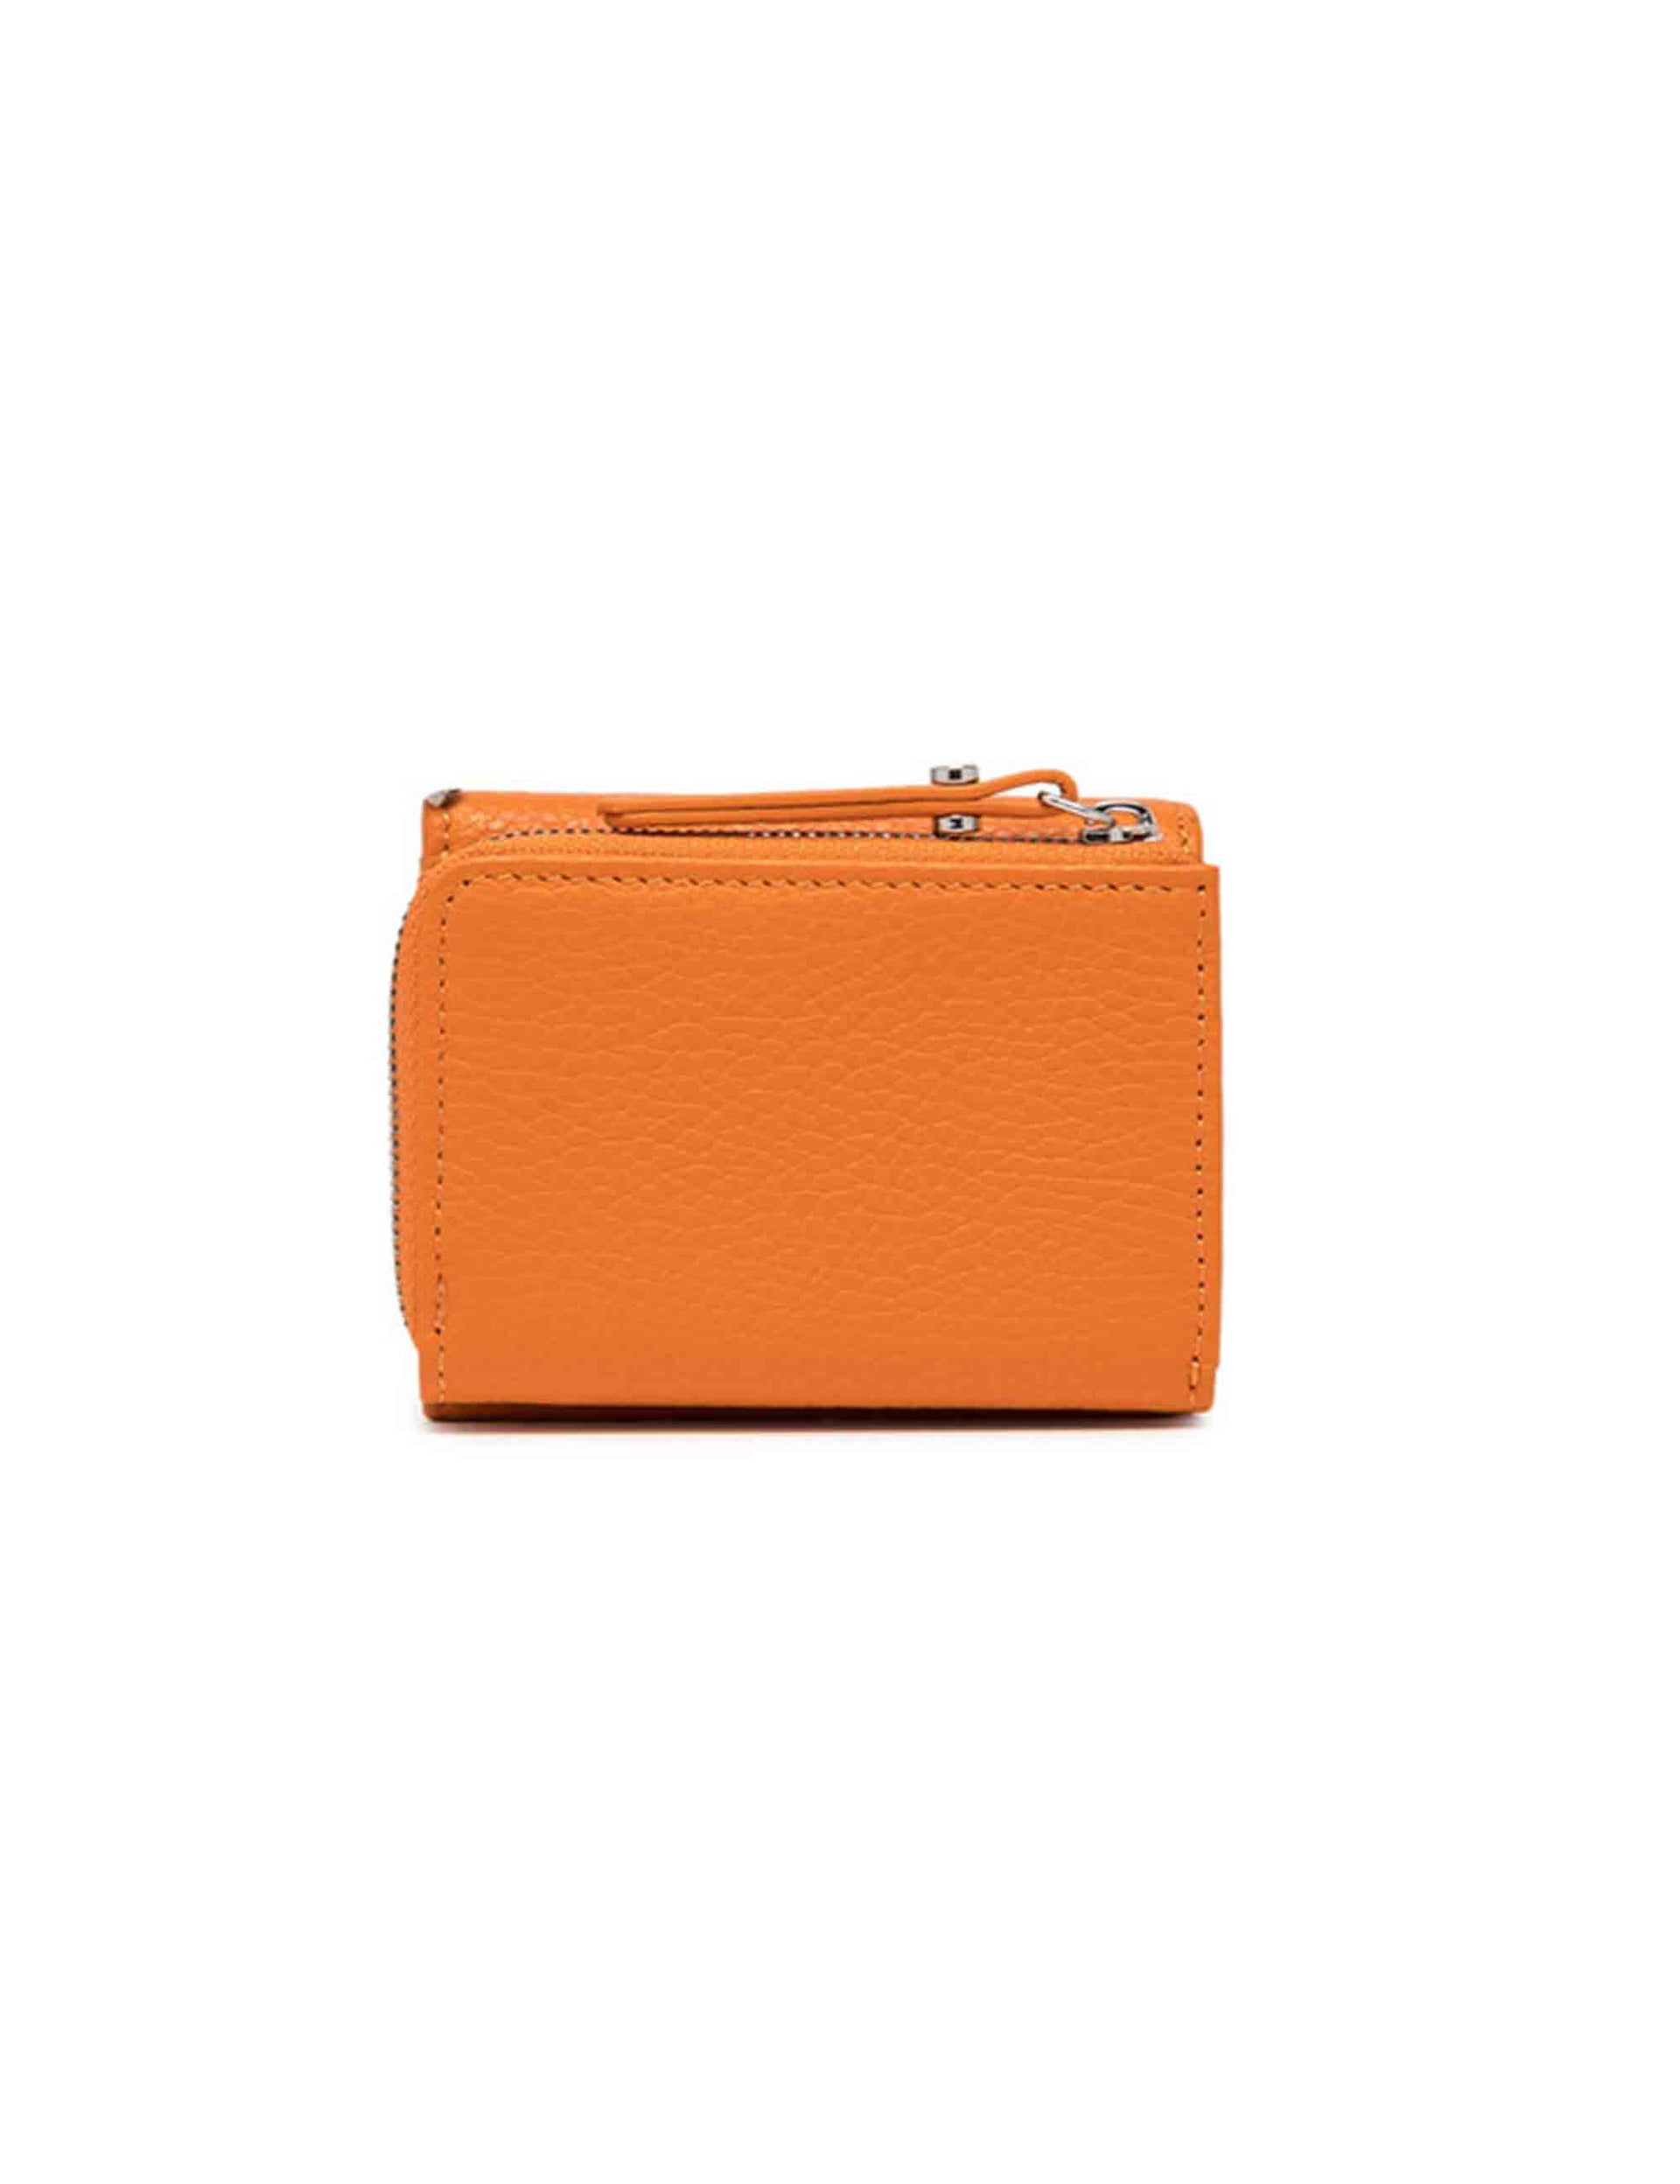 Women's orange leather wallet with external coin purse